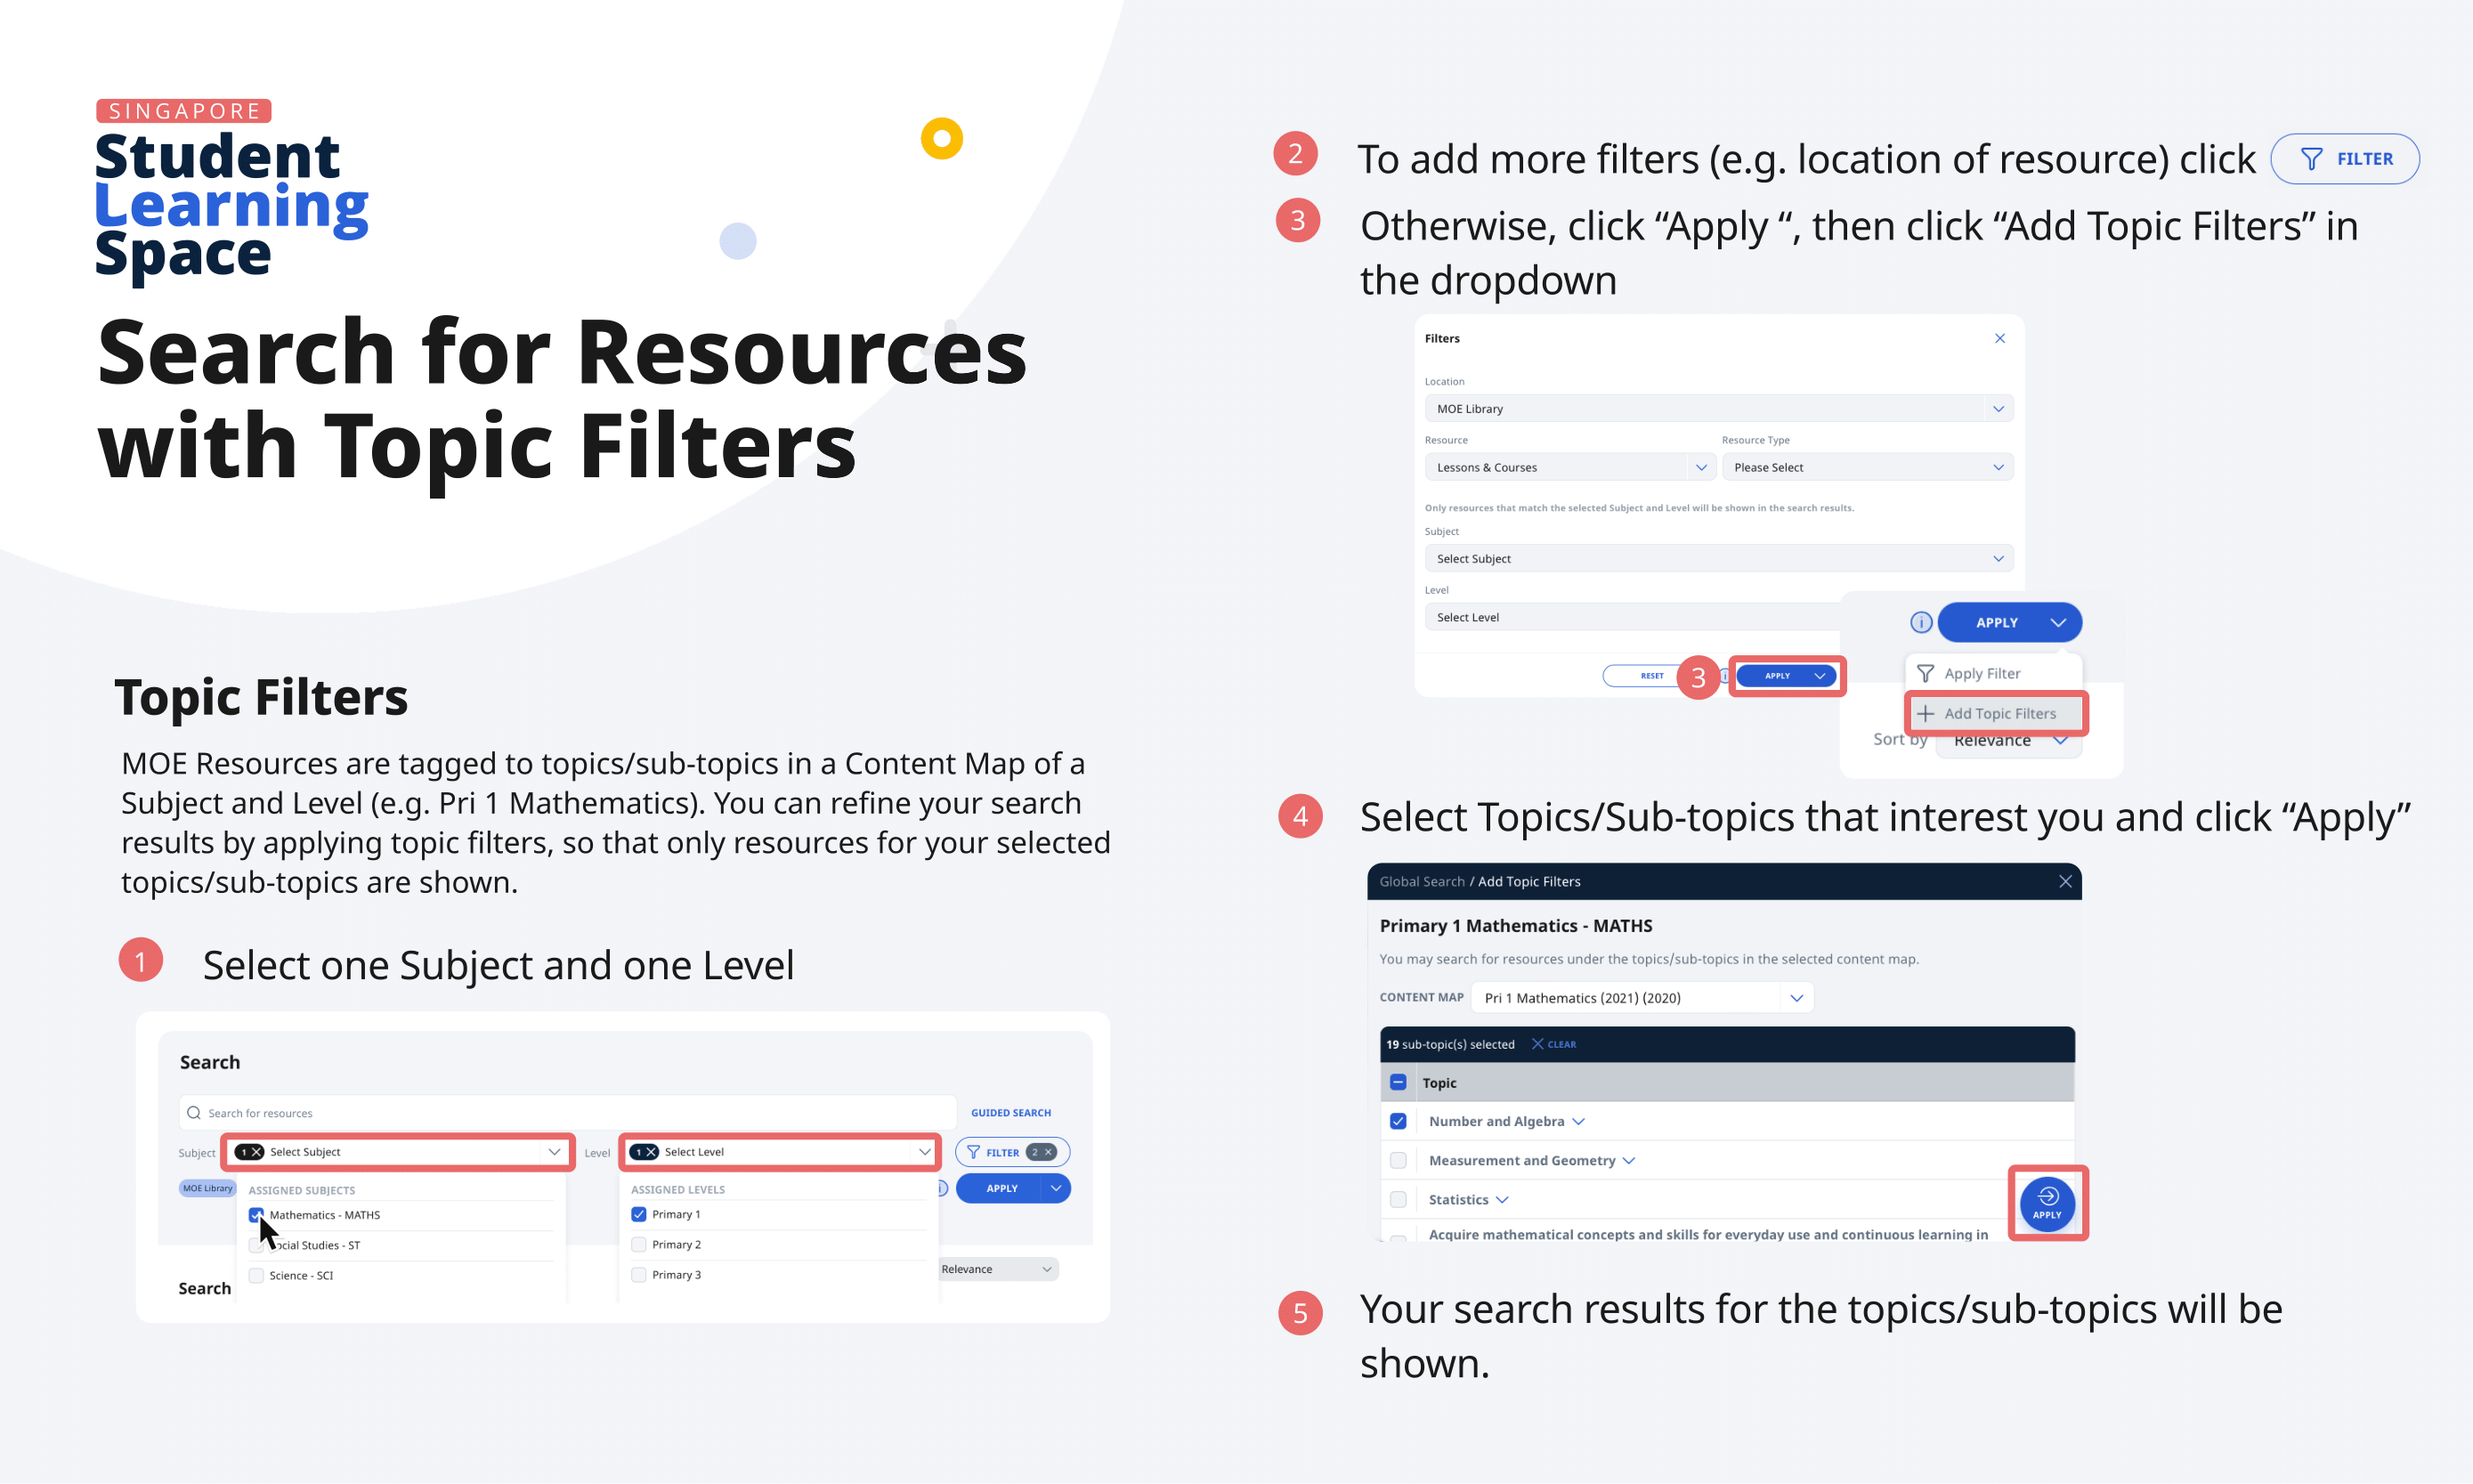 Topic Filters